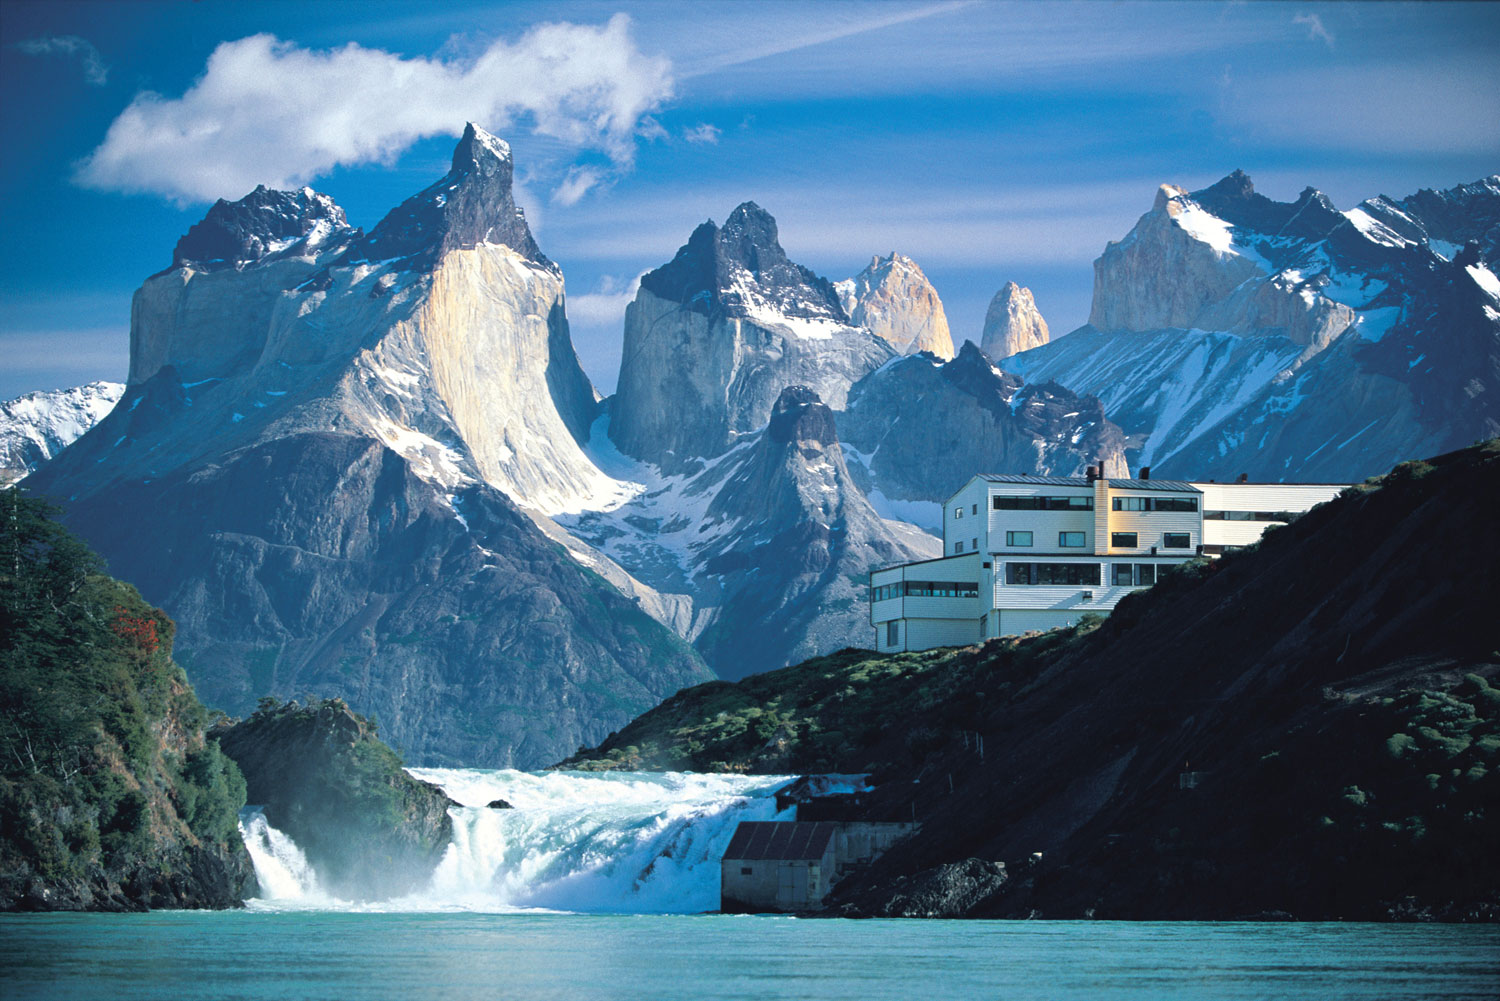 Explora Salto Chico hotel, overlooking Lake Pehoé, the Salto Chico waterfall and the Torres del Paine range.